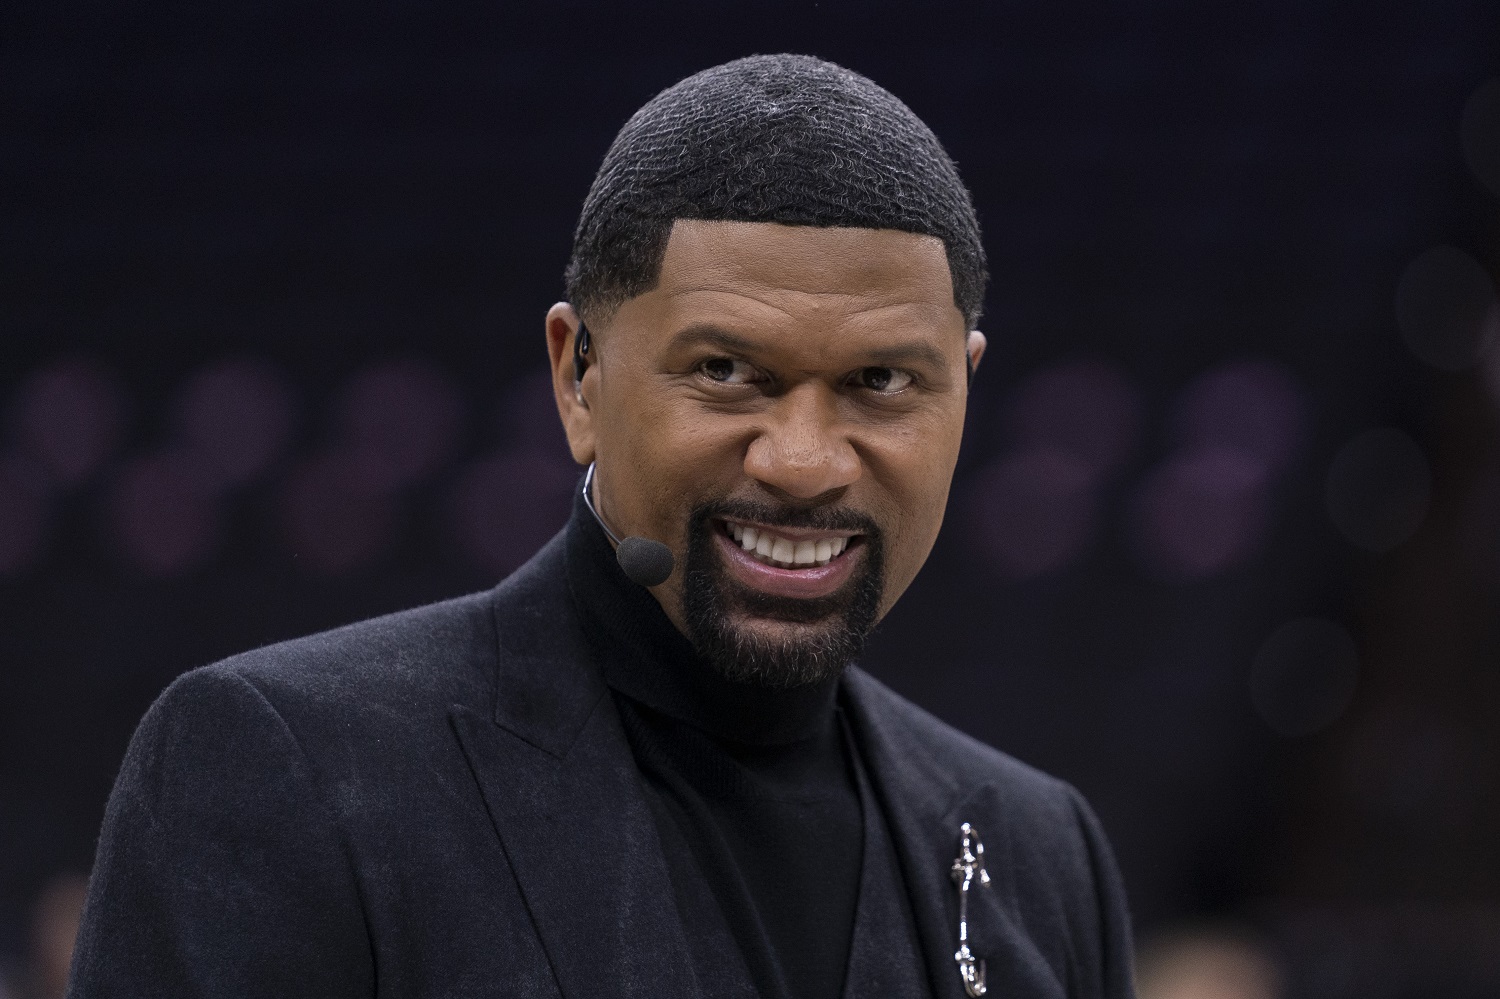 ESPN analyst Jalen Rose looks on prior to the game between the Los Angeles Lakers and Philadelphia 76ers at the Wells Fargo Center on Jan. 25, 2020, in Philadelphia.